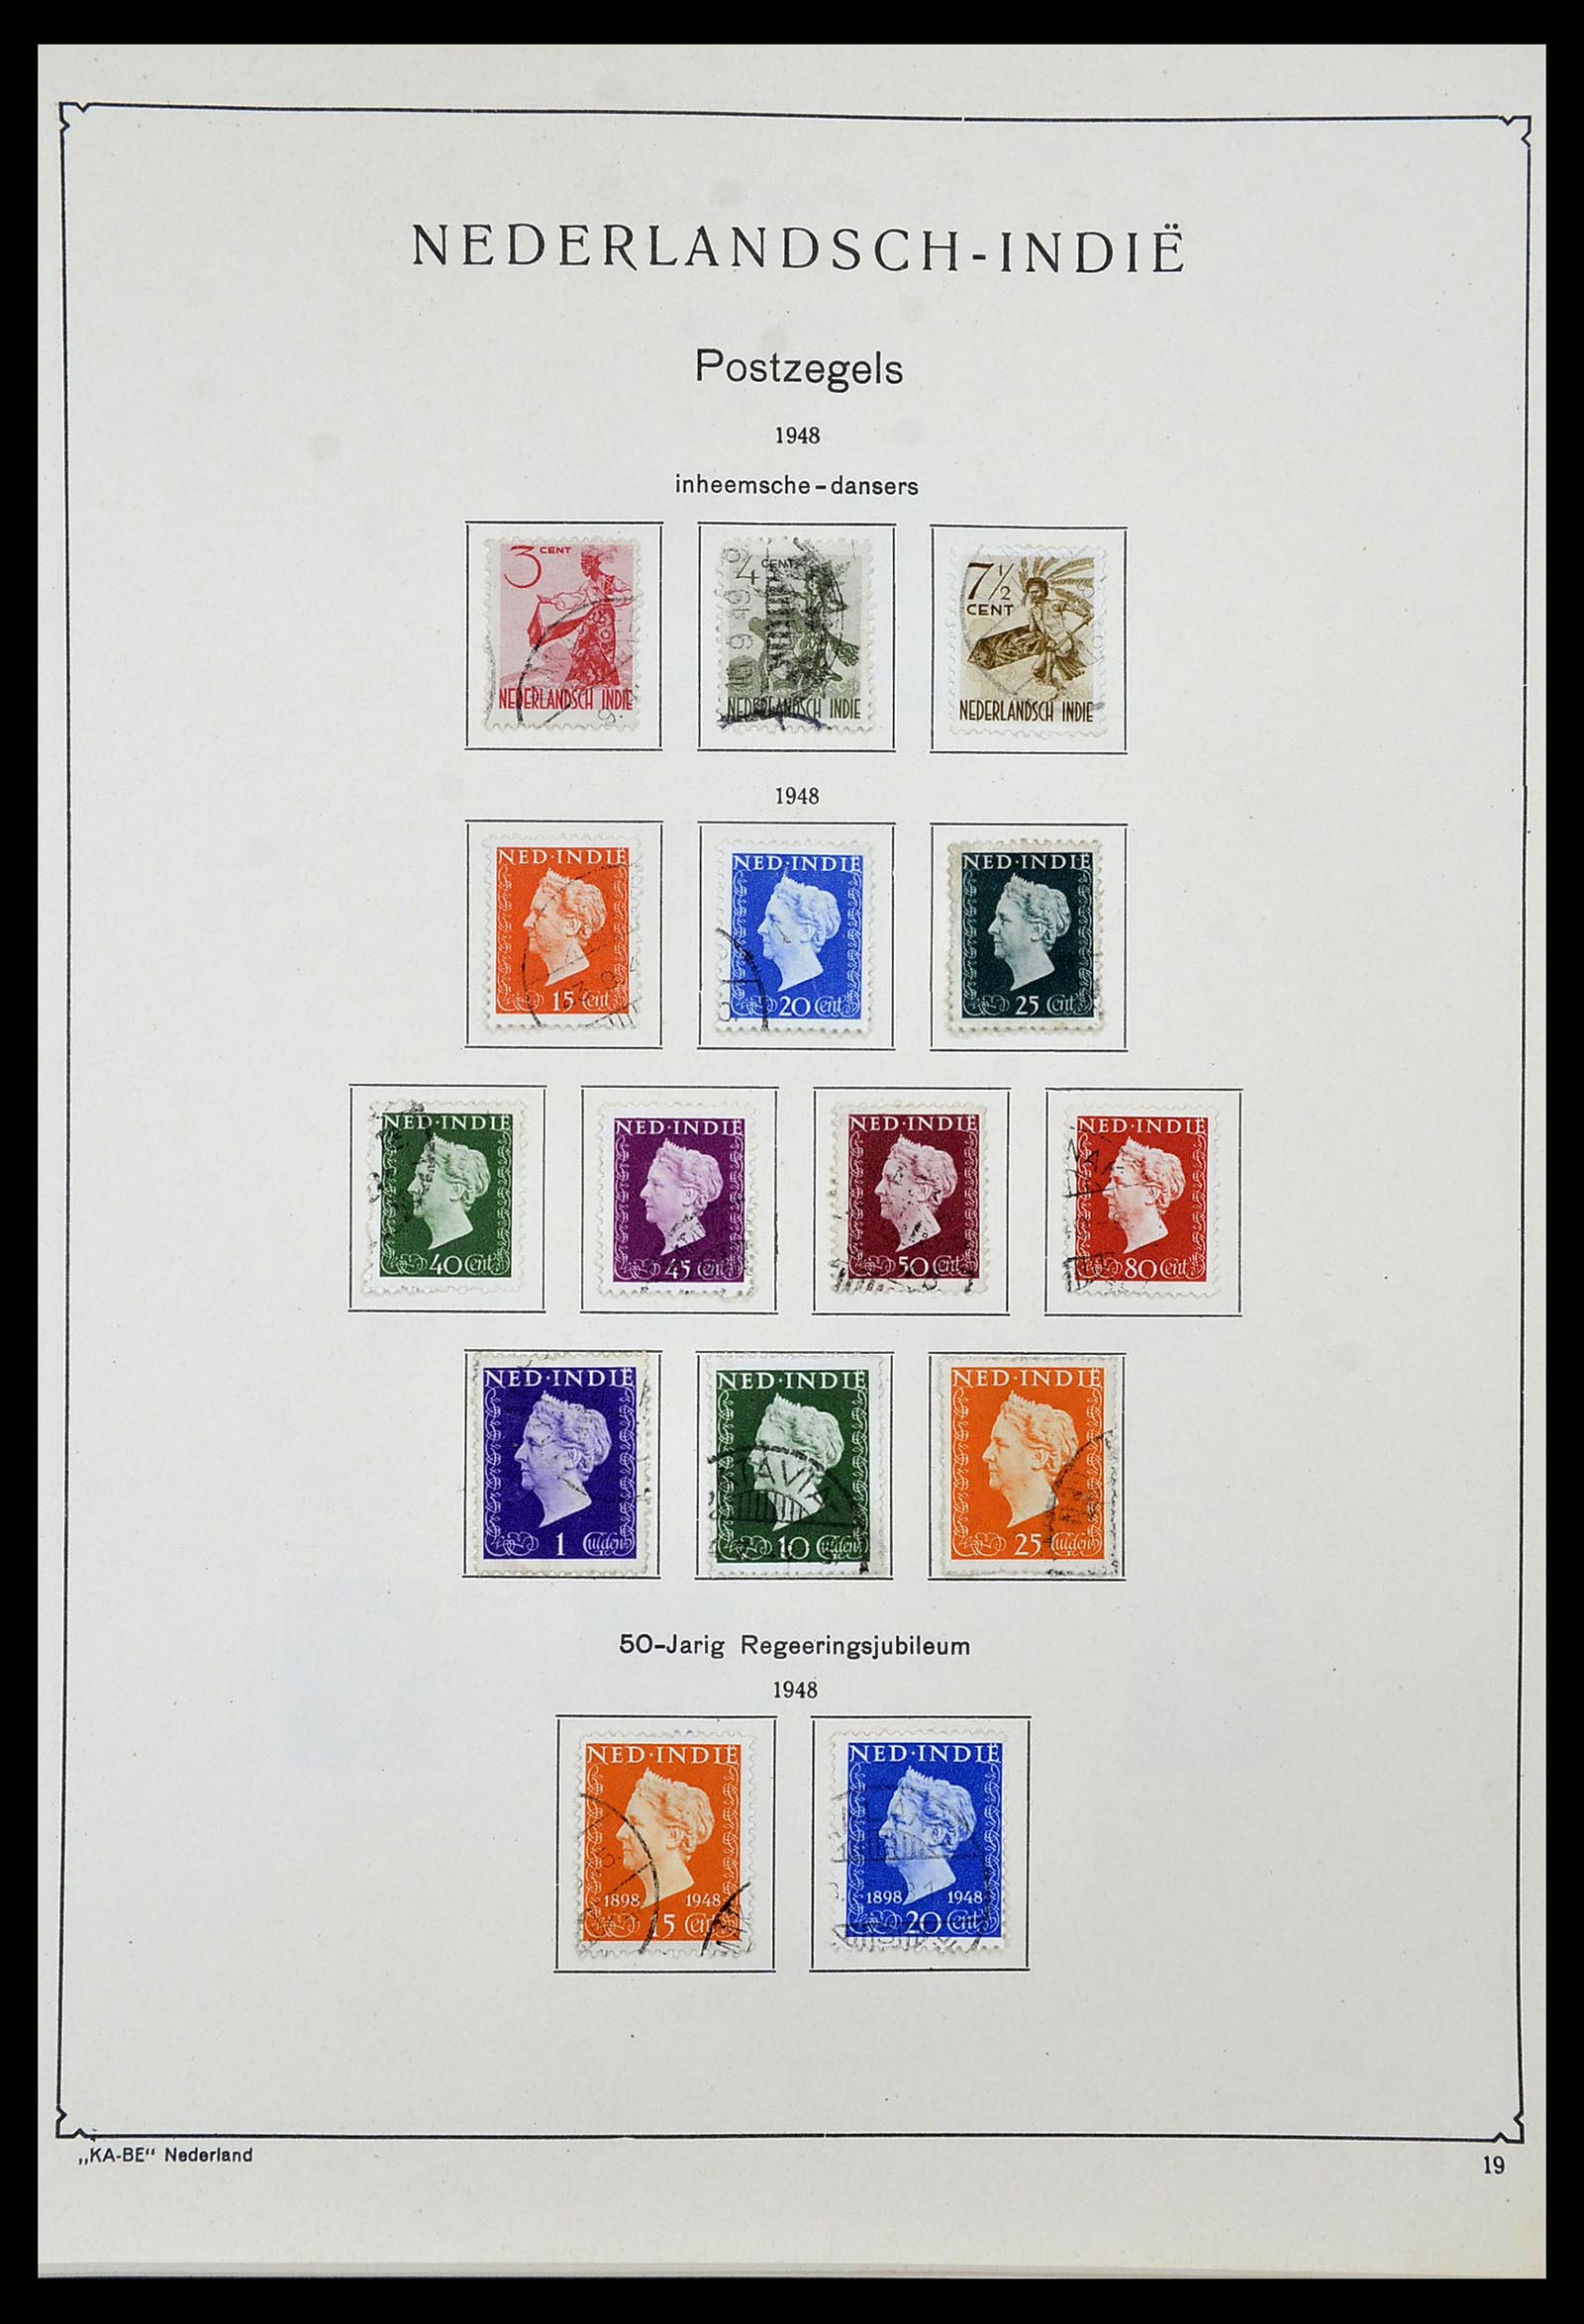 34592 034 - Stamp Collection 34592 Dutch east Indies and Indonesia 1864-1963.